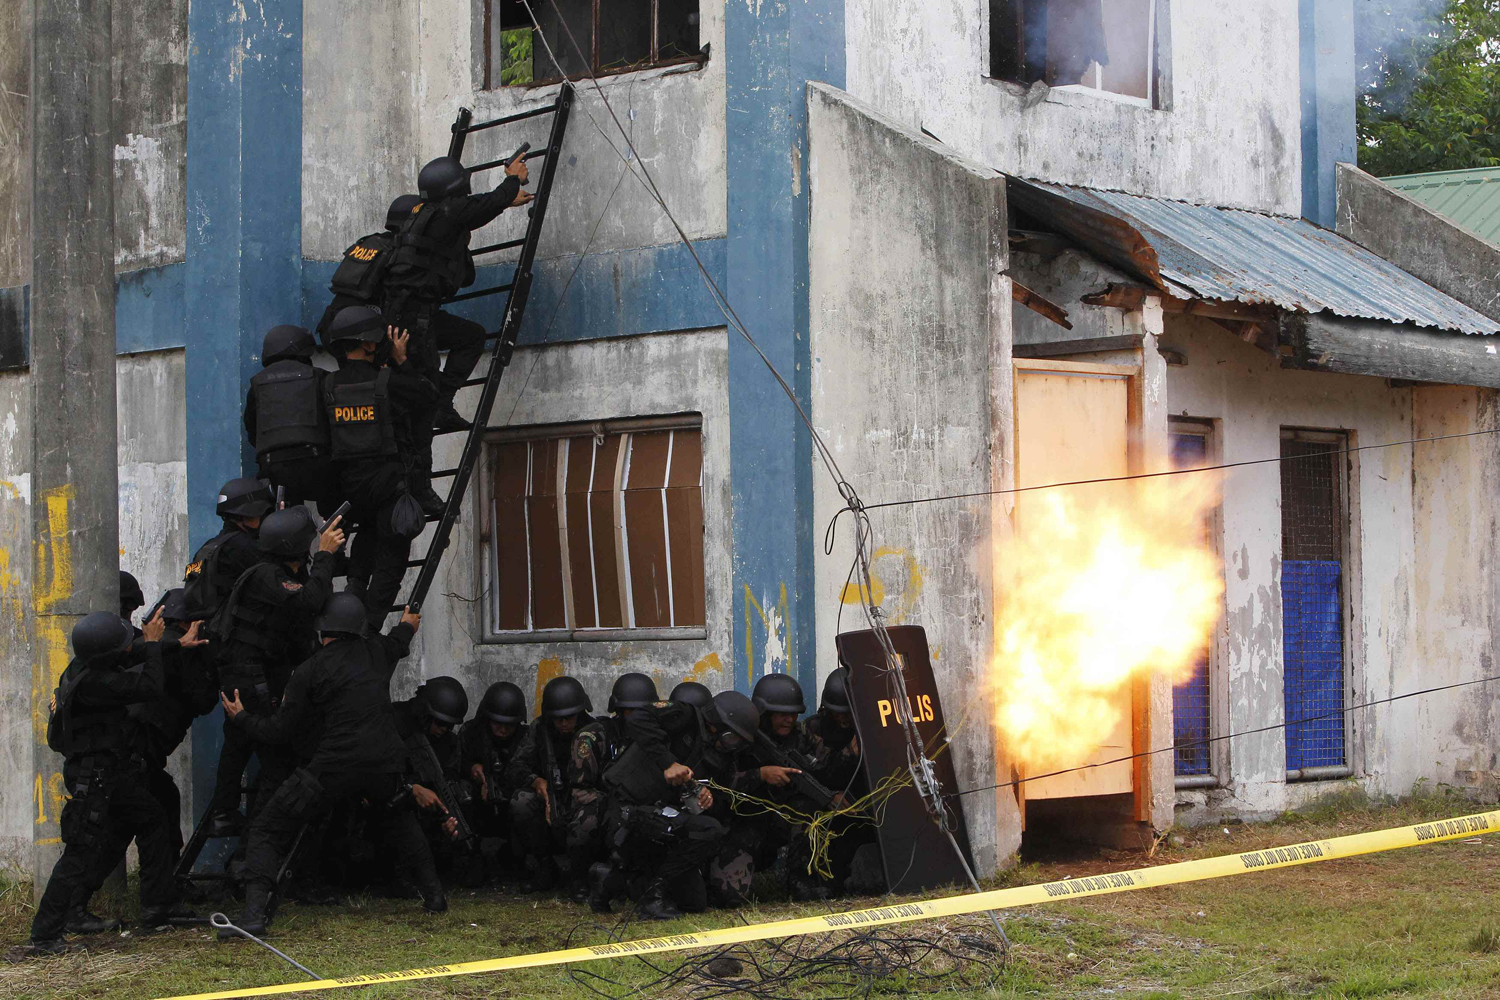 June 1, 2012. Members of the Philippine National Police Aviation Security Group use an improvised bomb to blast through the main door of a building, simulating an airport control tower seized by a mock terrorist group, at Taguig city, south of Manila.